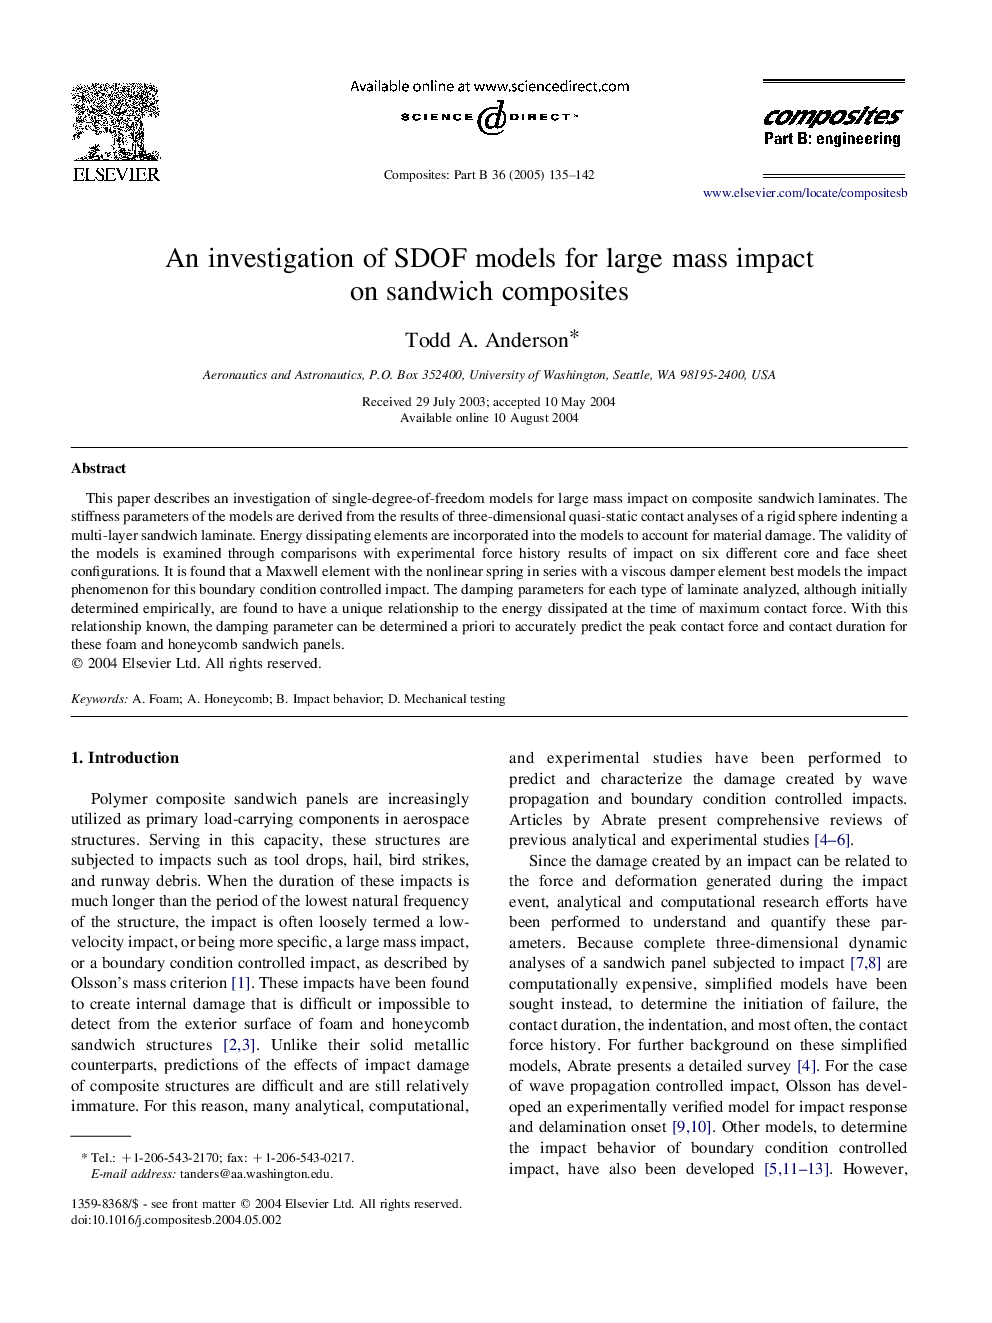 An investigation of SDOF models for large mass impact on sandwich composites